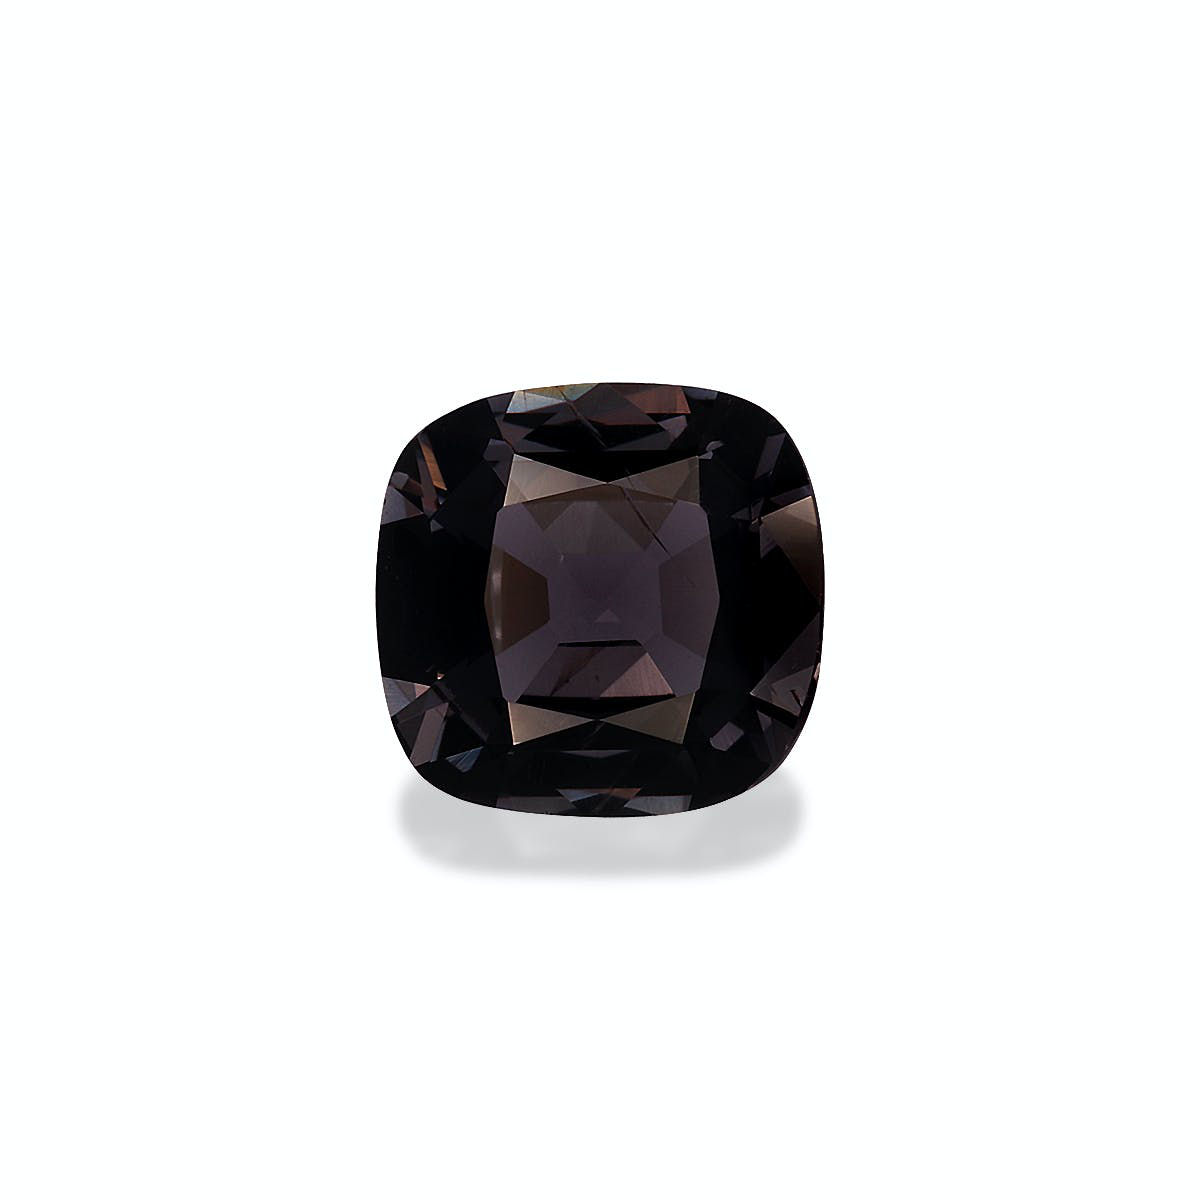 Picture of Metallic Grey Spinel 1.48ct - 7mm (SP0353)